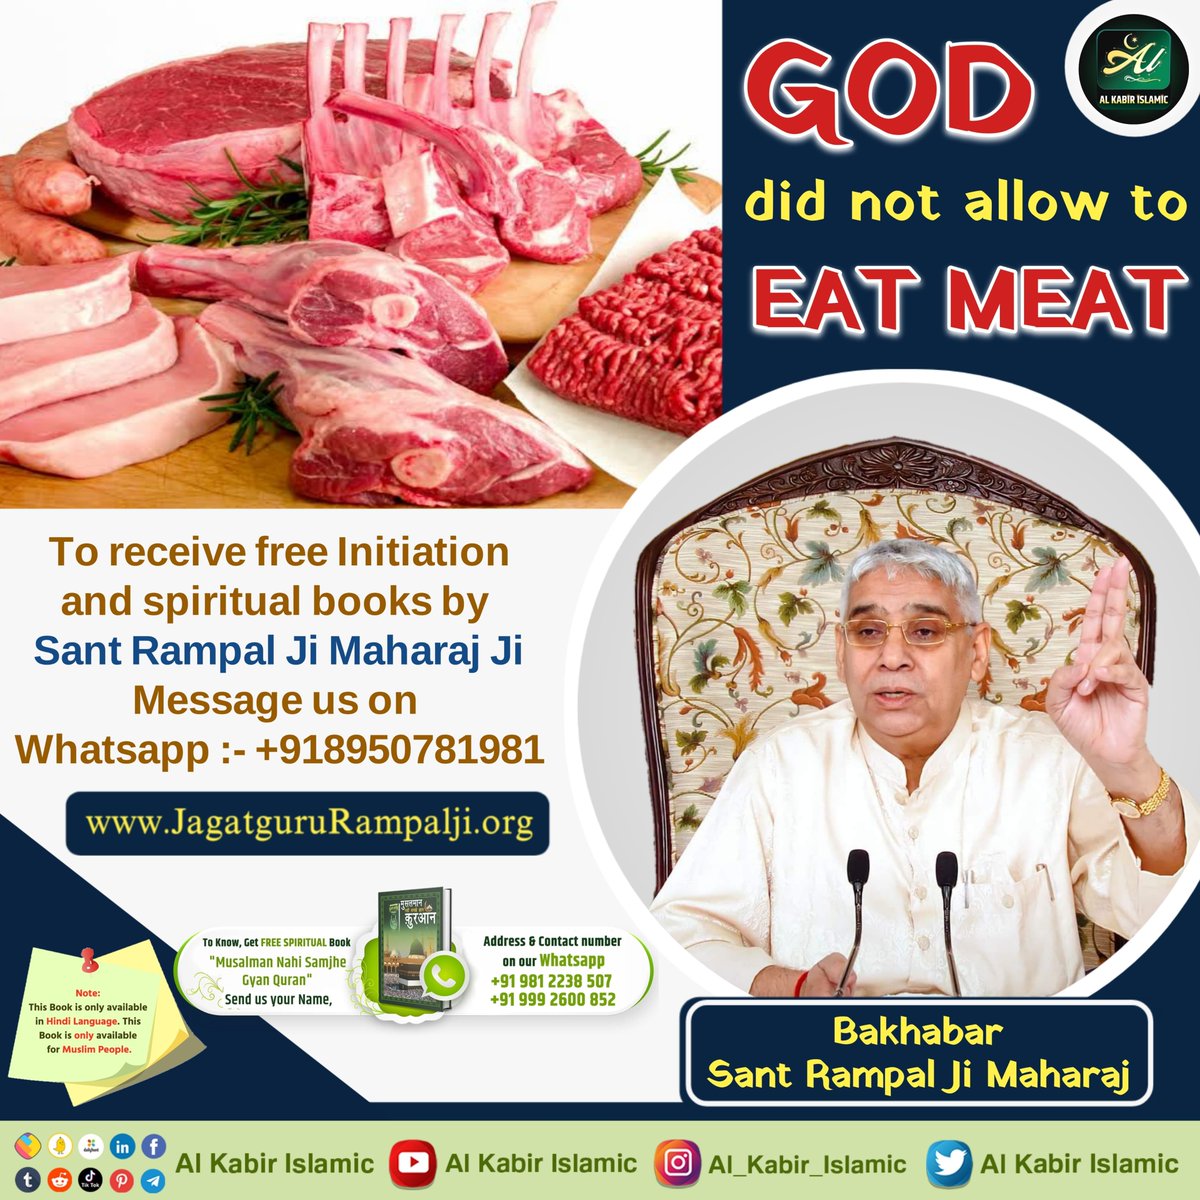 Tᴏᴅᴀʏ's-  #SaturdayMorning
Those who kill animal's for the taste of tongue are sinners.
     They're accumulating Bad Karma's .

Stop eating meat.
#GodMorningSaturday